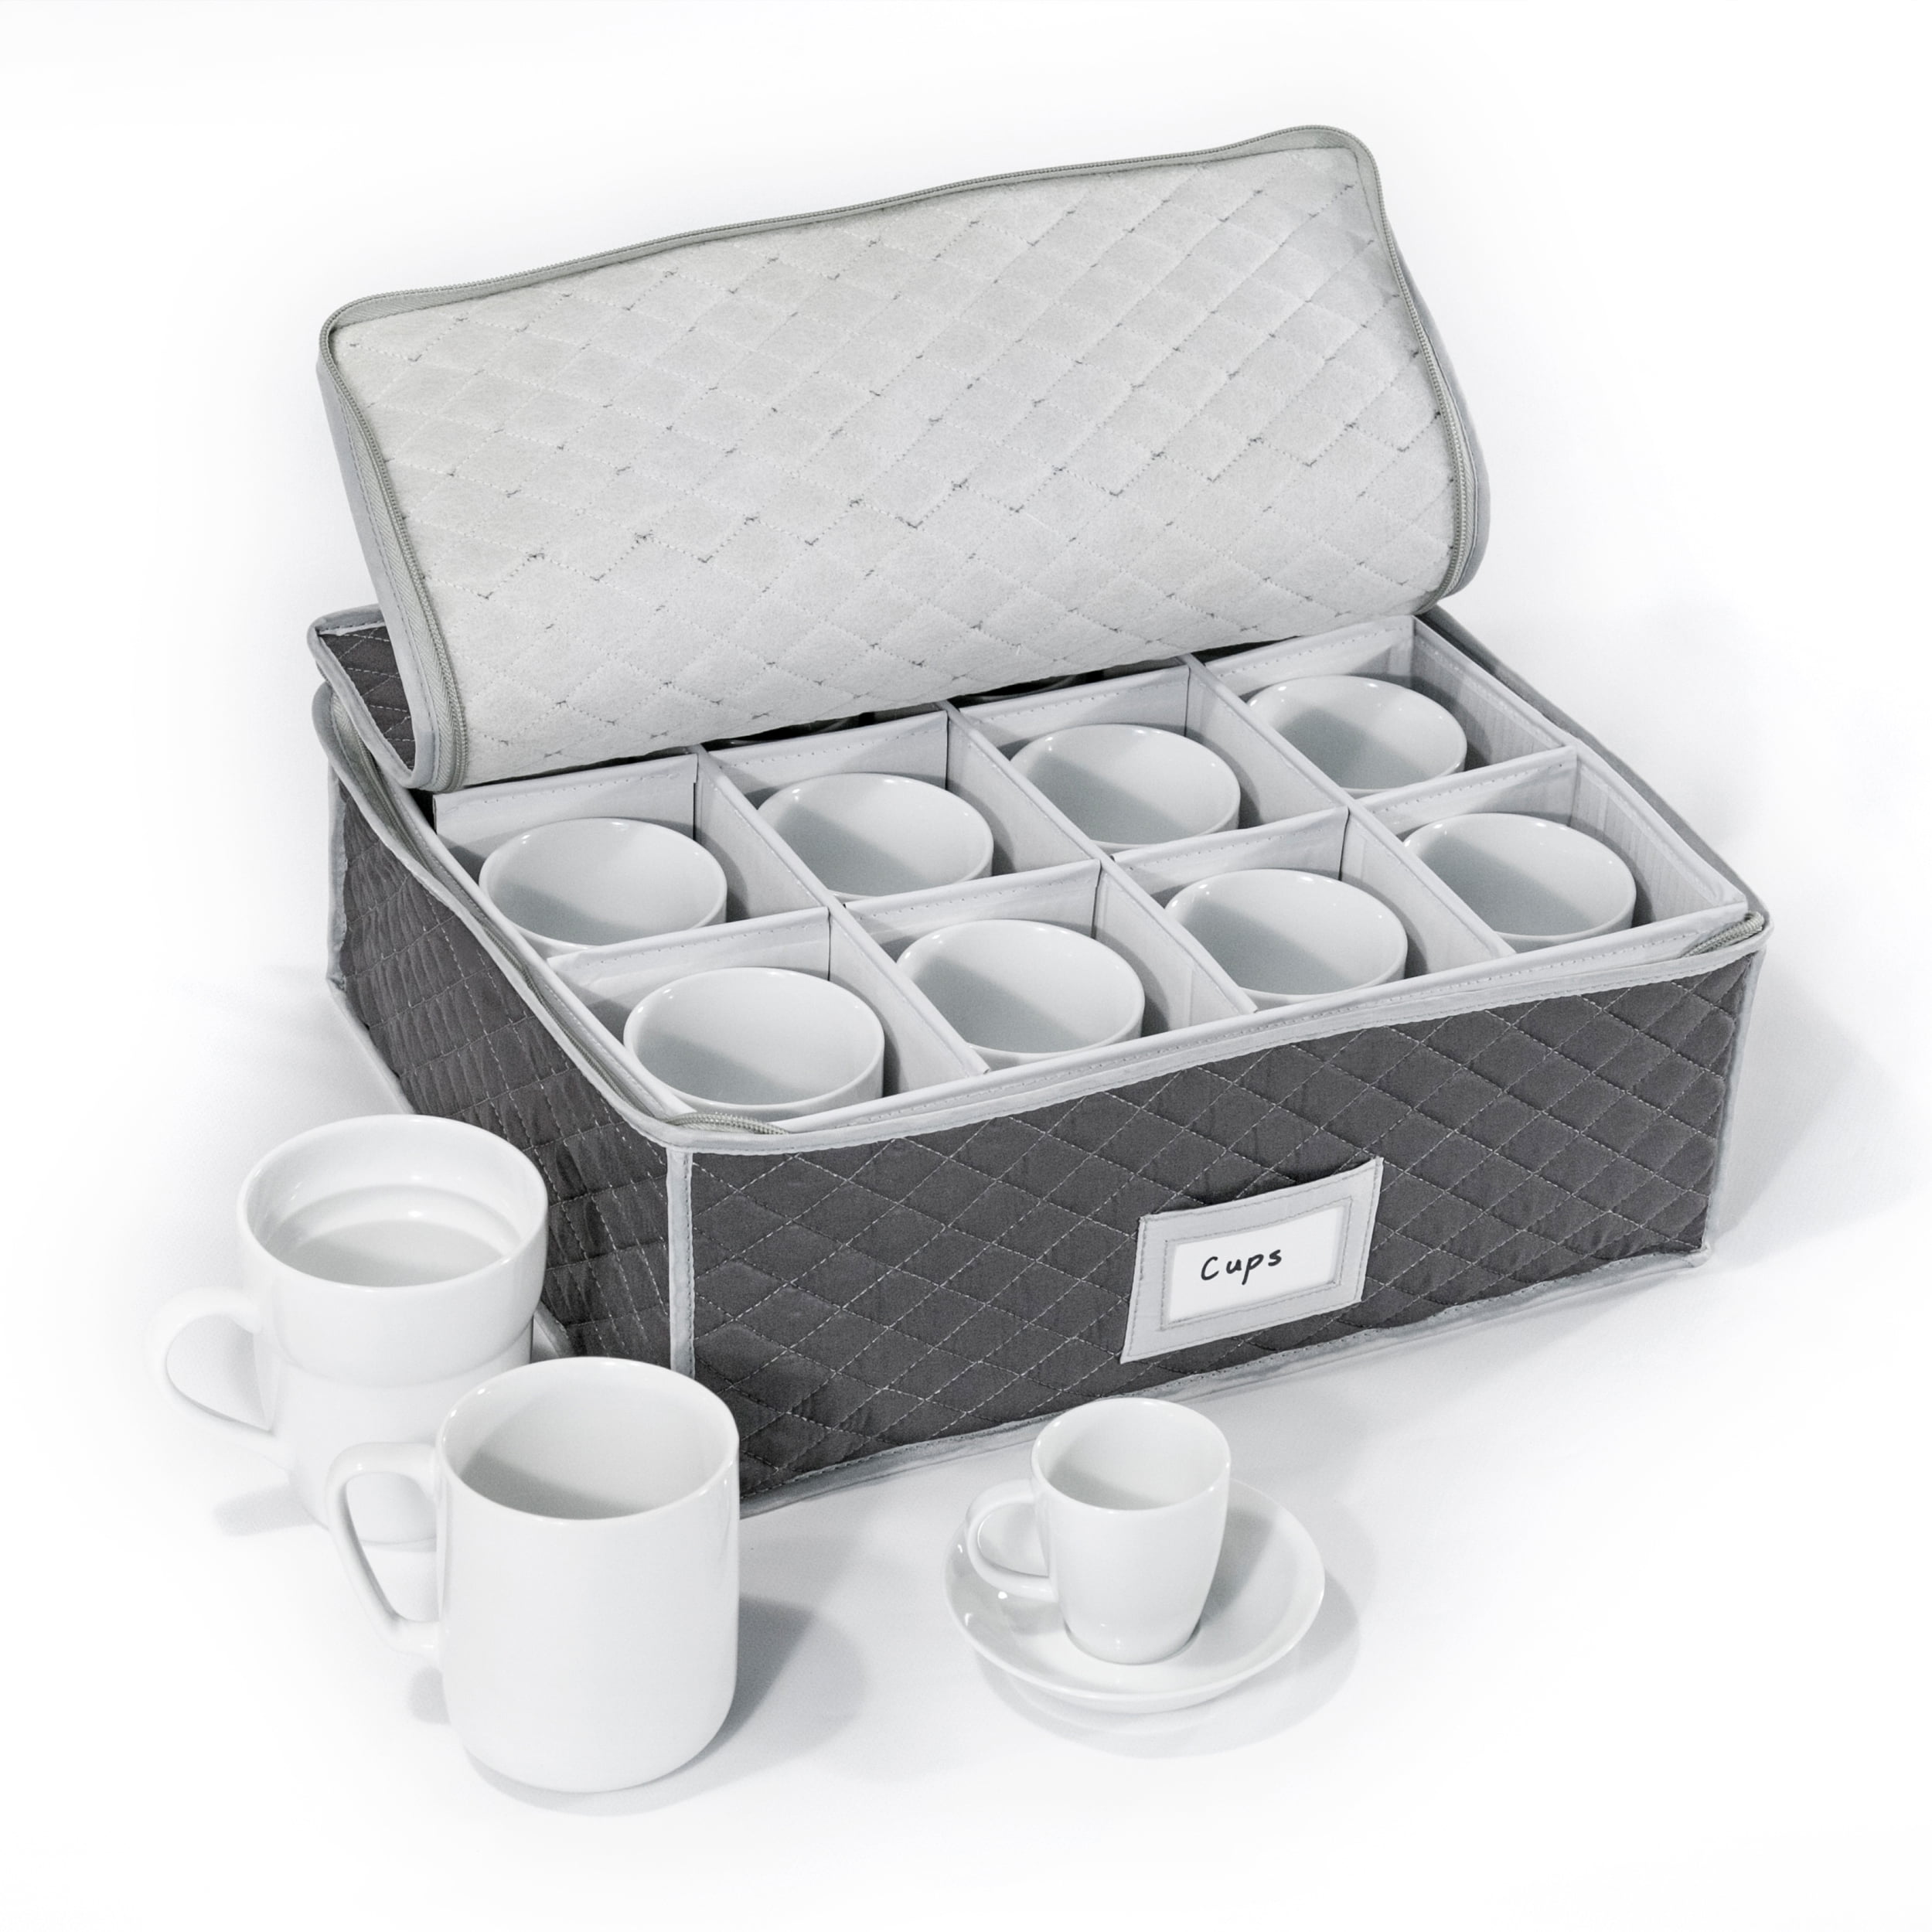 Simplify 12-Count China Mug and Cup Storage Box 9066 - The Home Depot